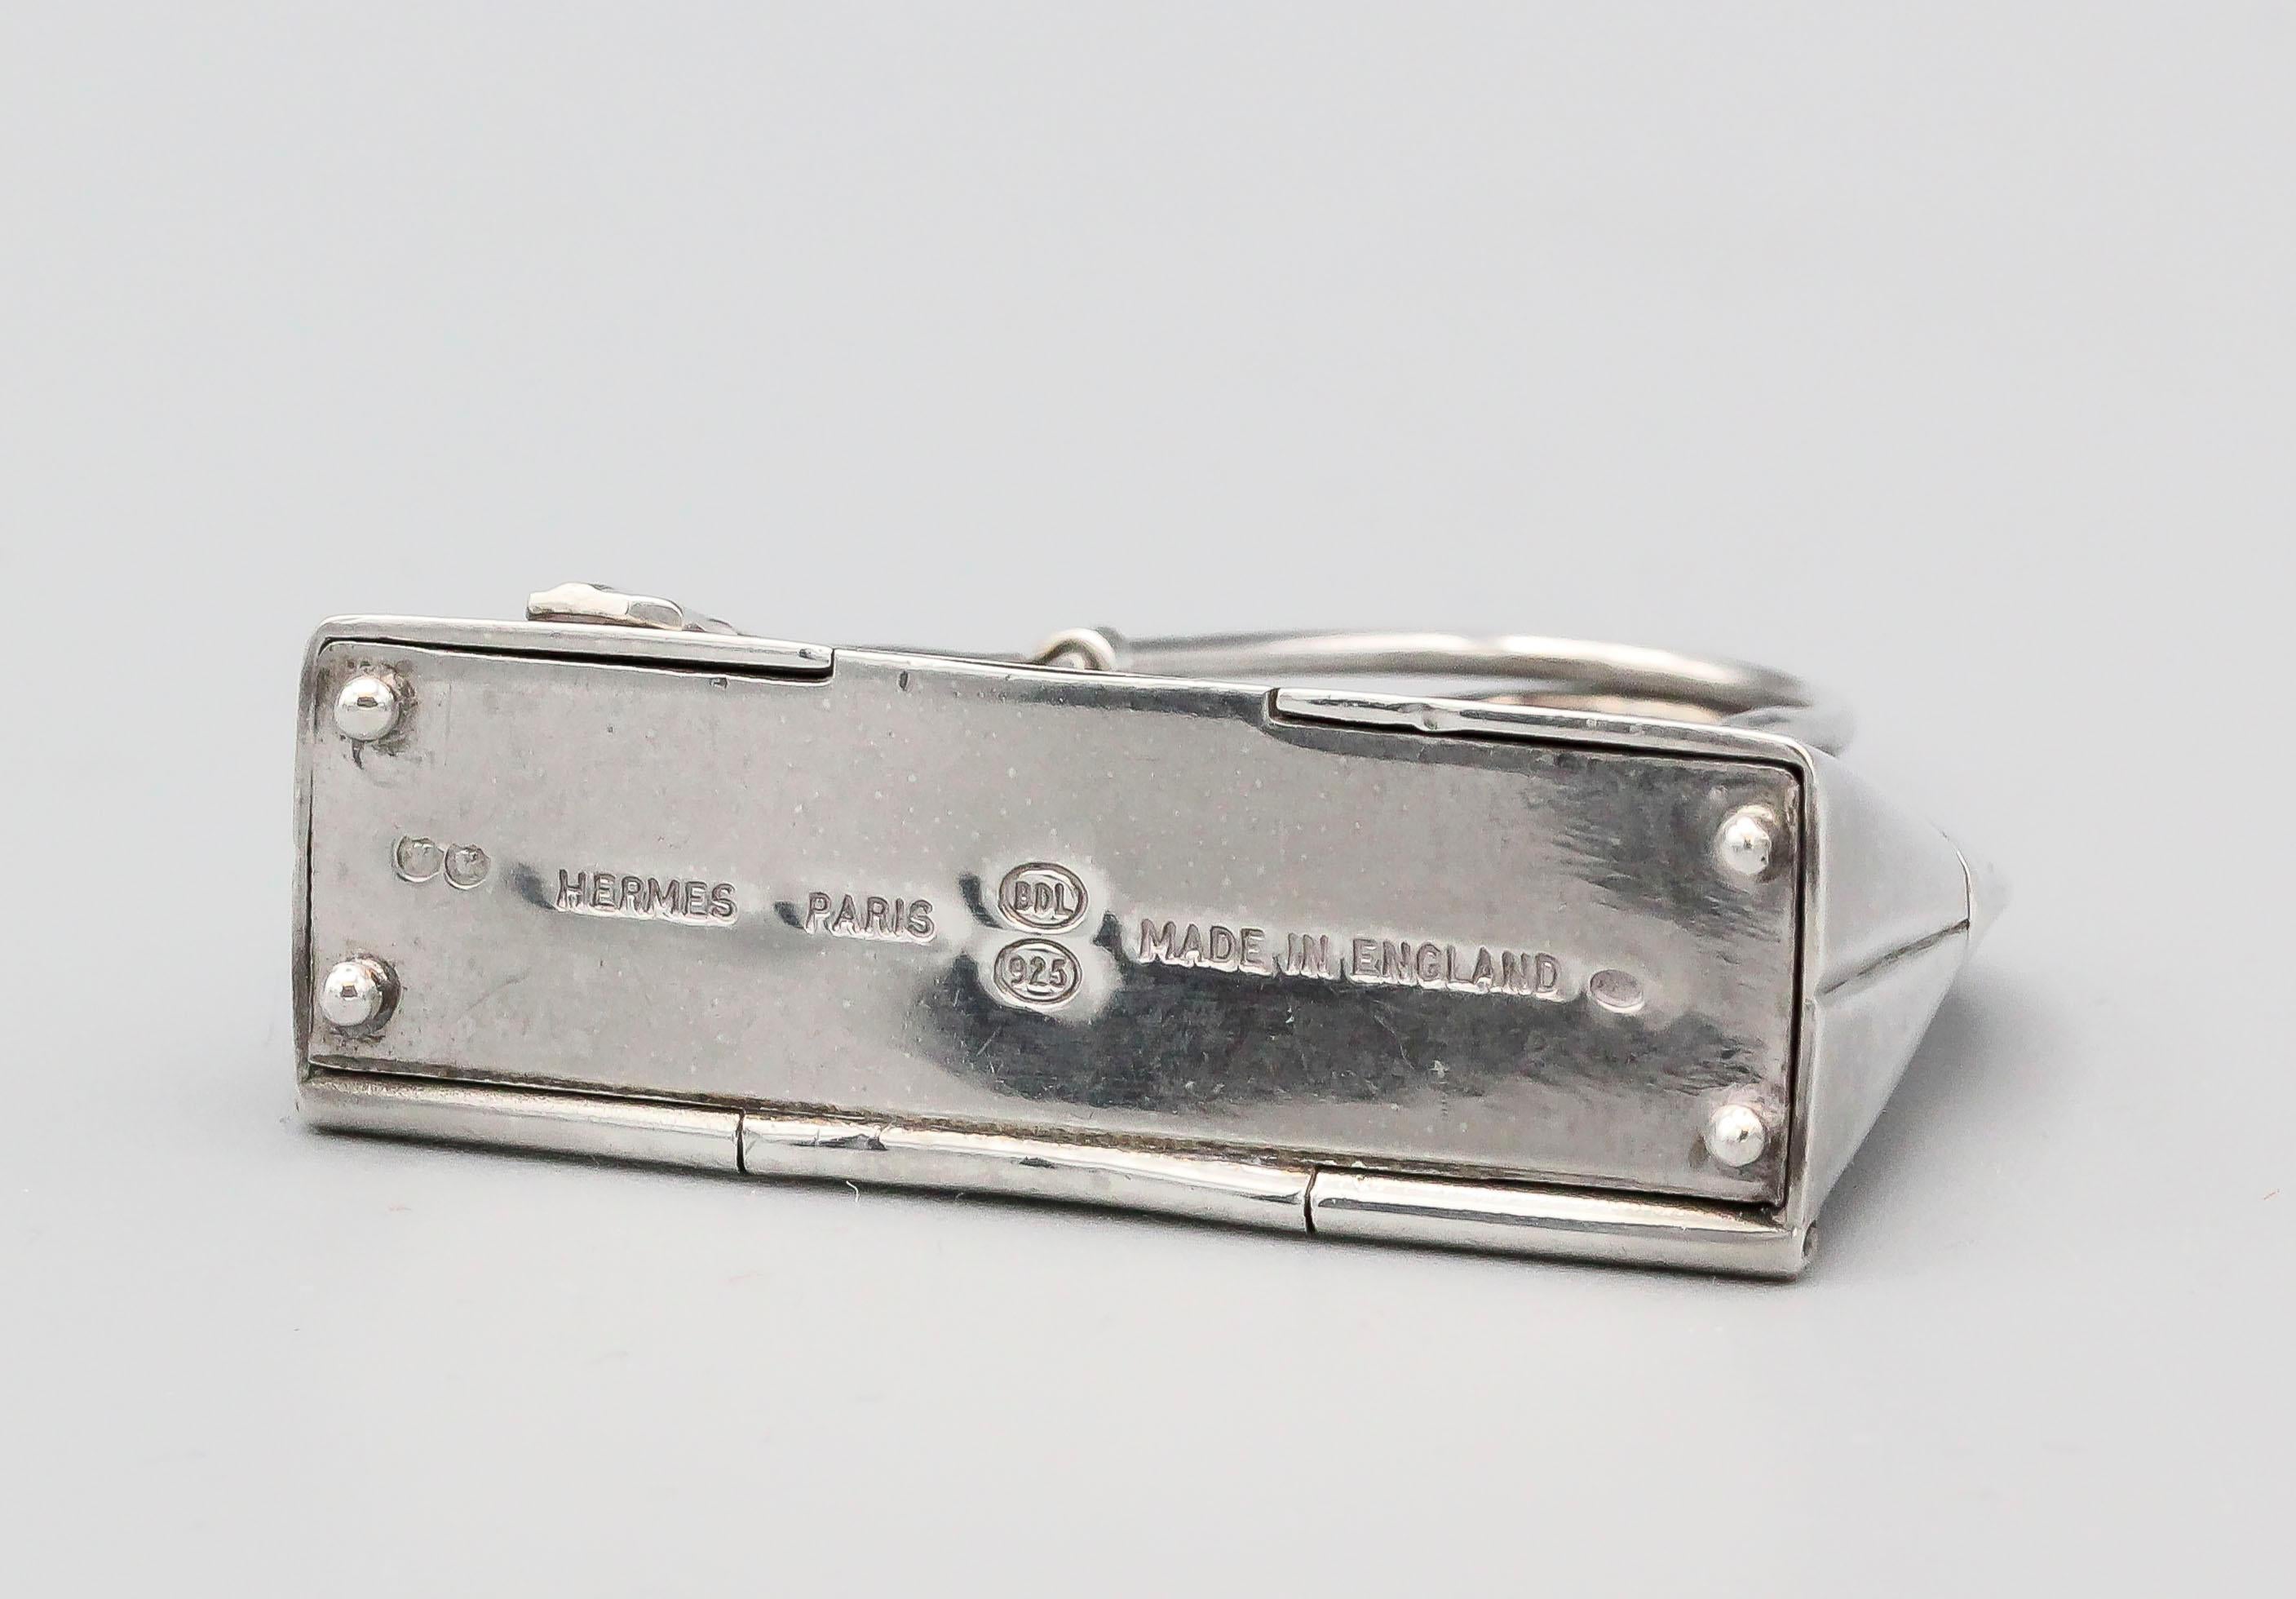 Fine sterling silver pill box in the likeness of an Hermes Bolide bag, by Hermes.  The box can be used in a multitude of ways: as a standard pillbox, a pendant, or as a charm.  Almost 2 inches wide and approx. 30 grams in weight.

Hallmarks: Hermes